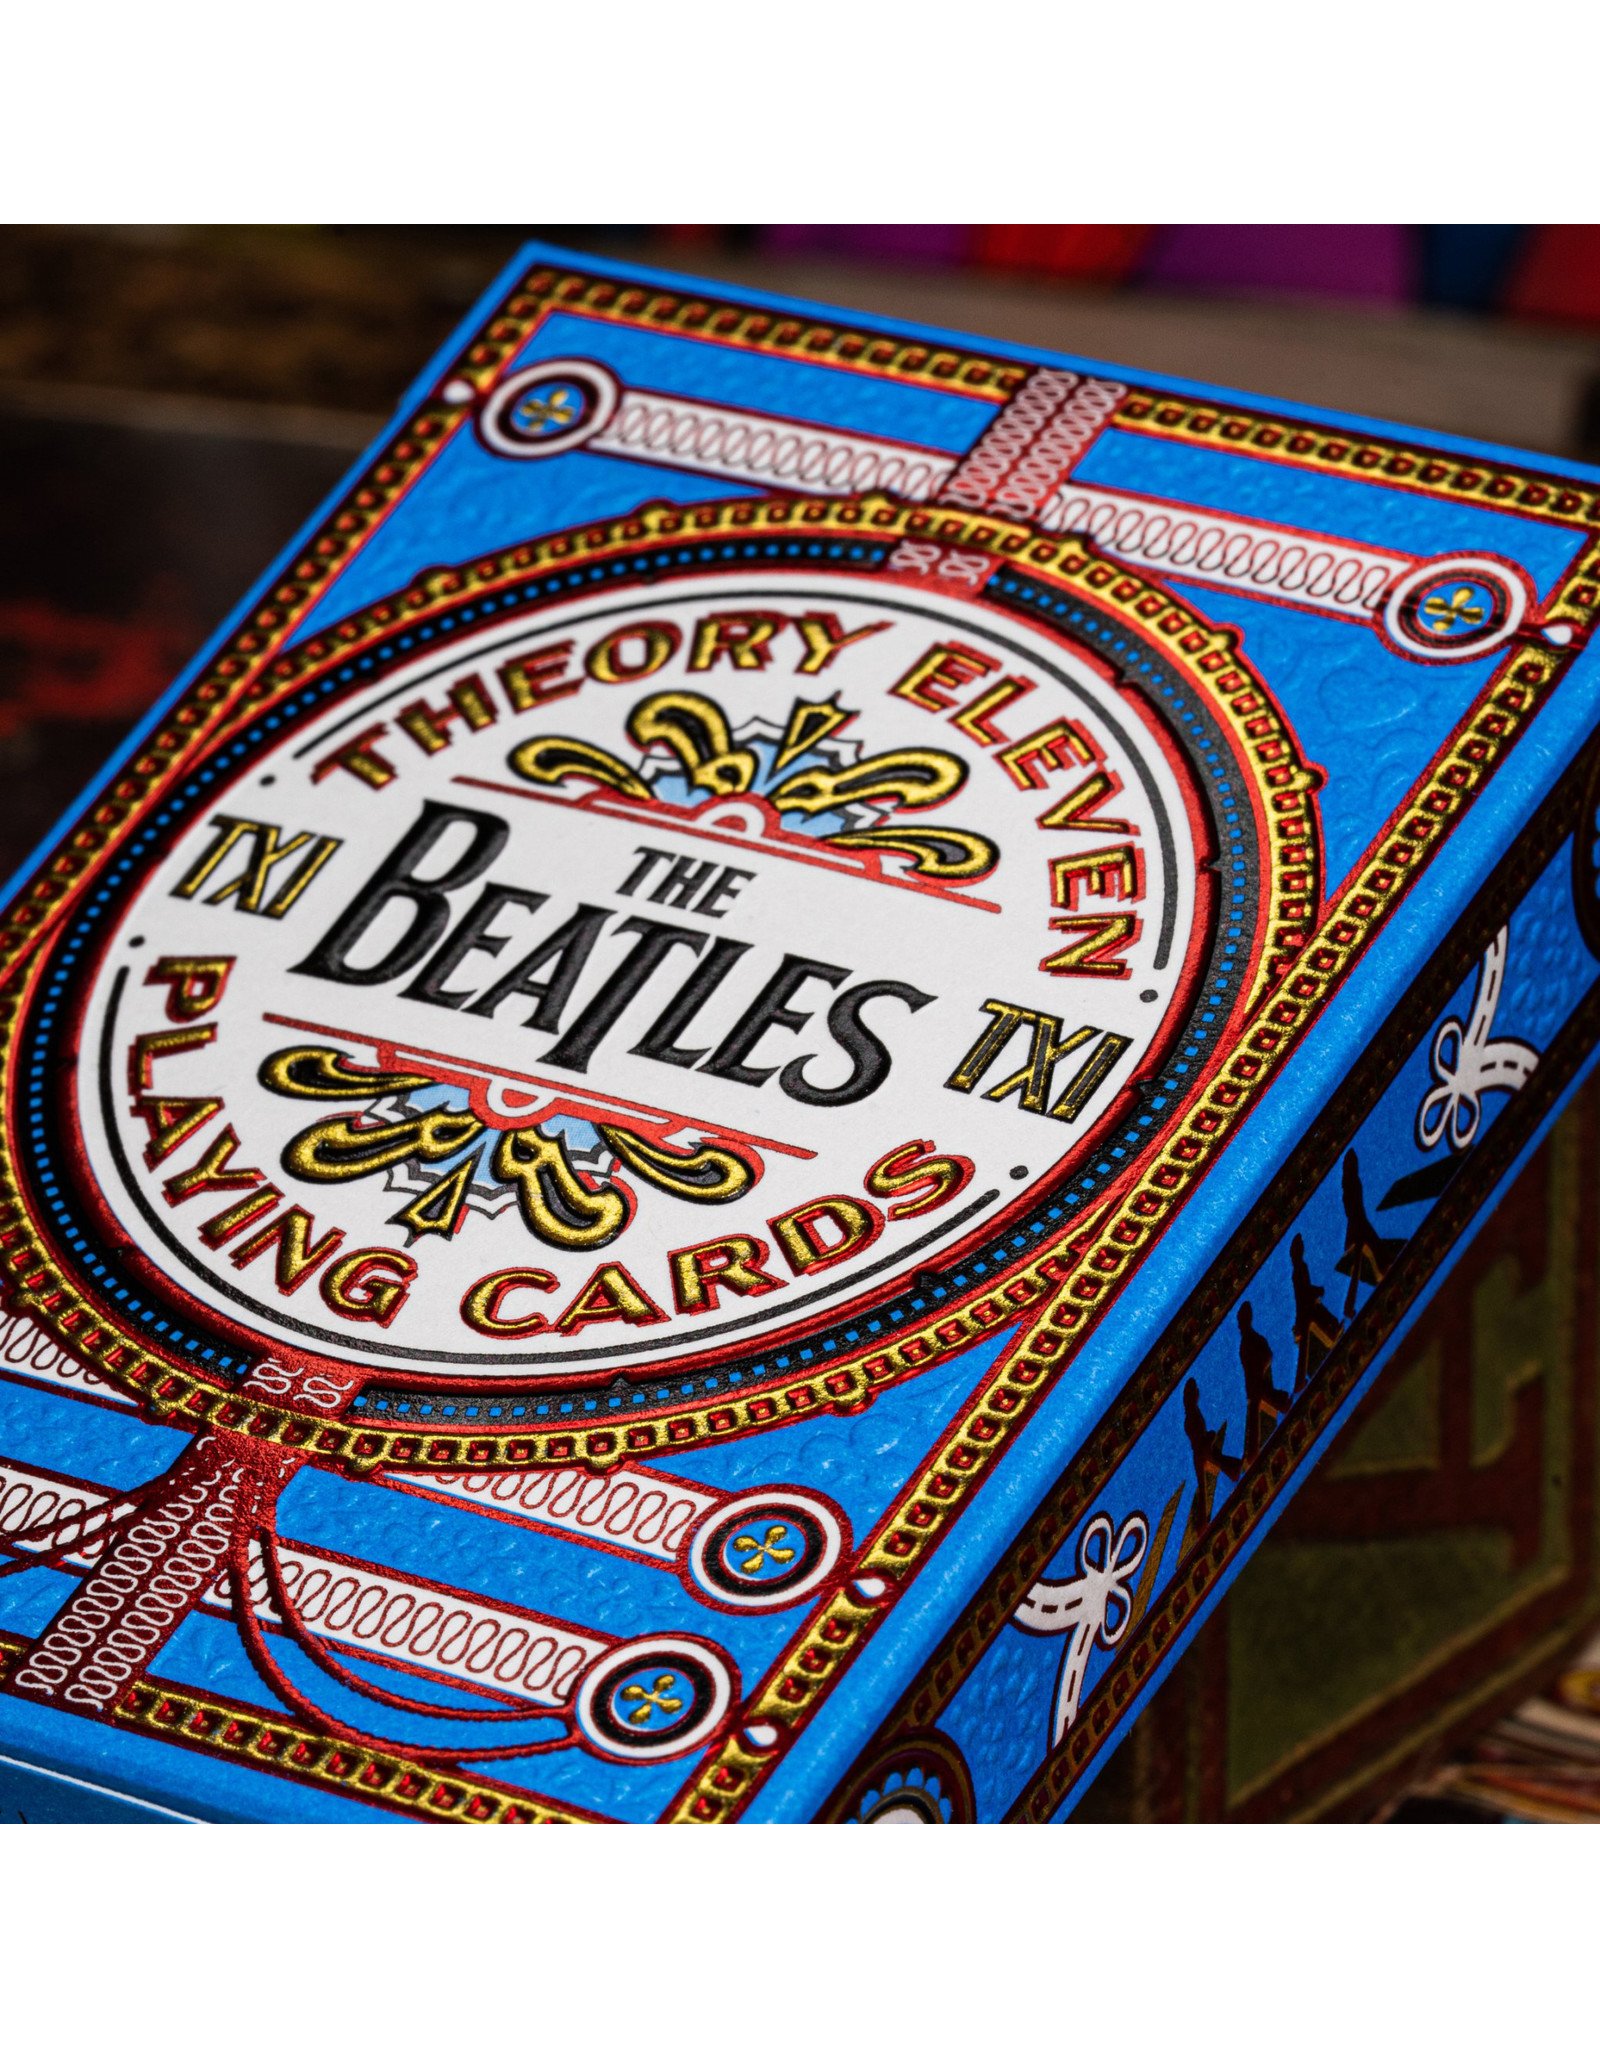 Theory 11 Beatles Blue Playing Cards